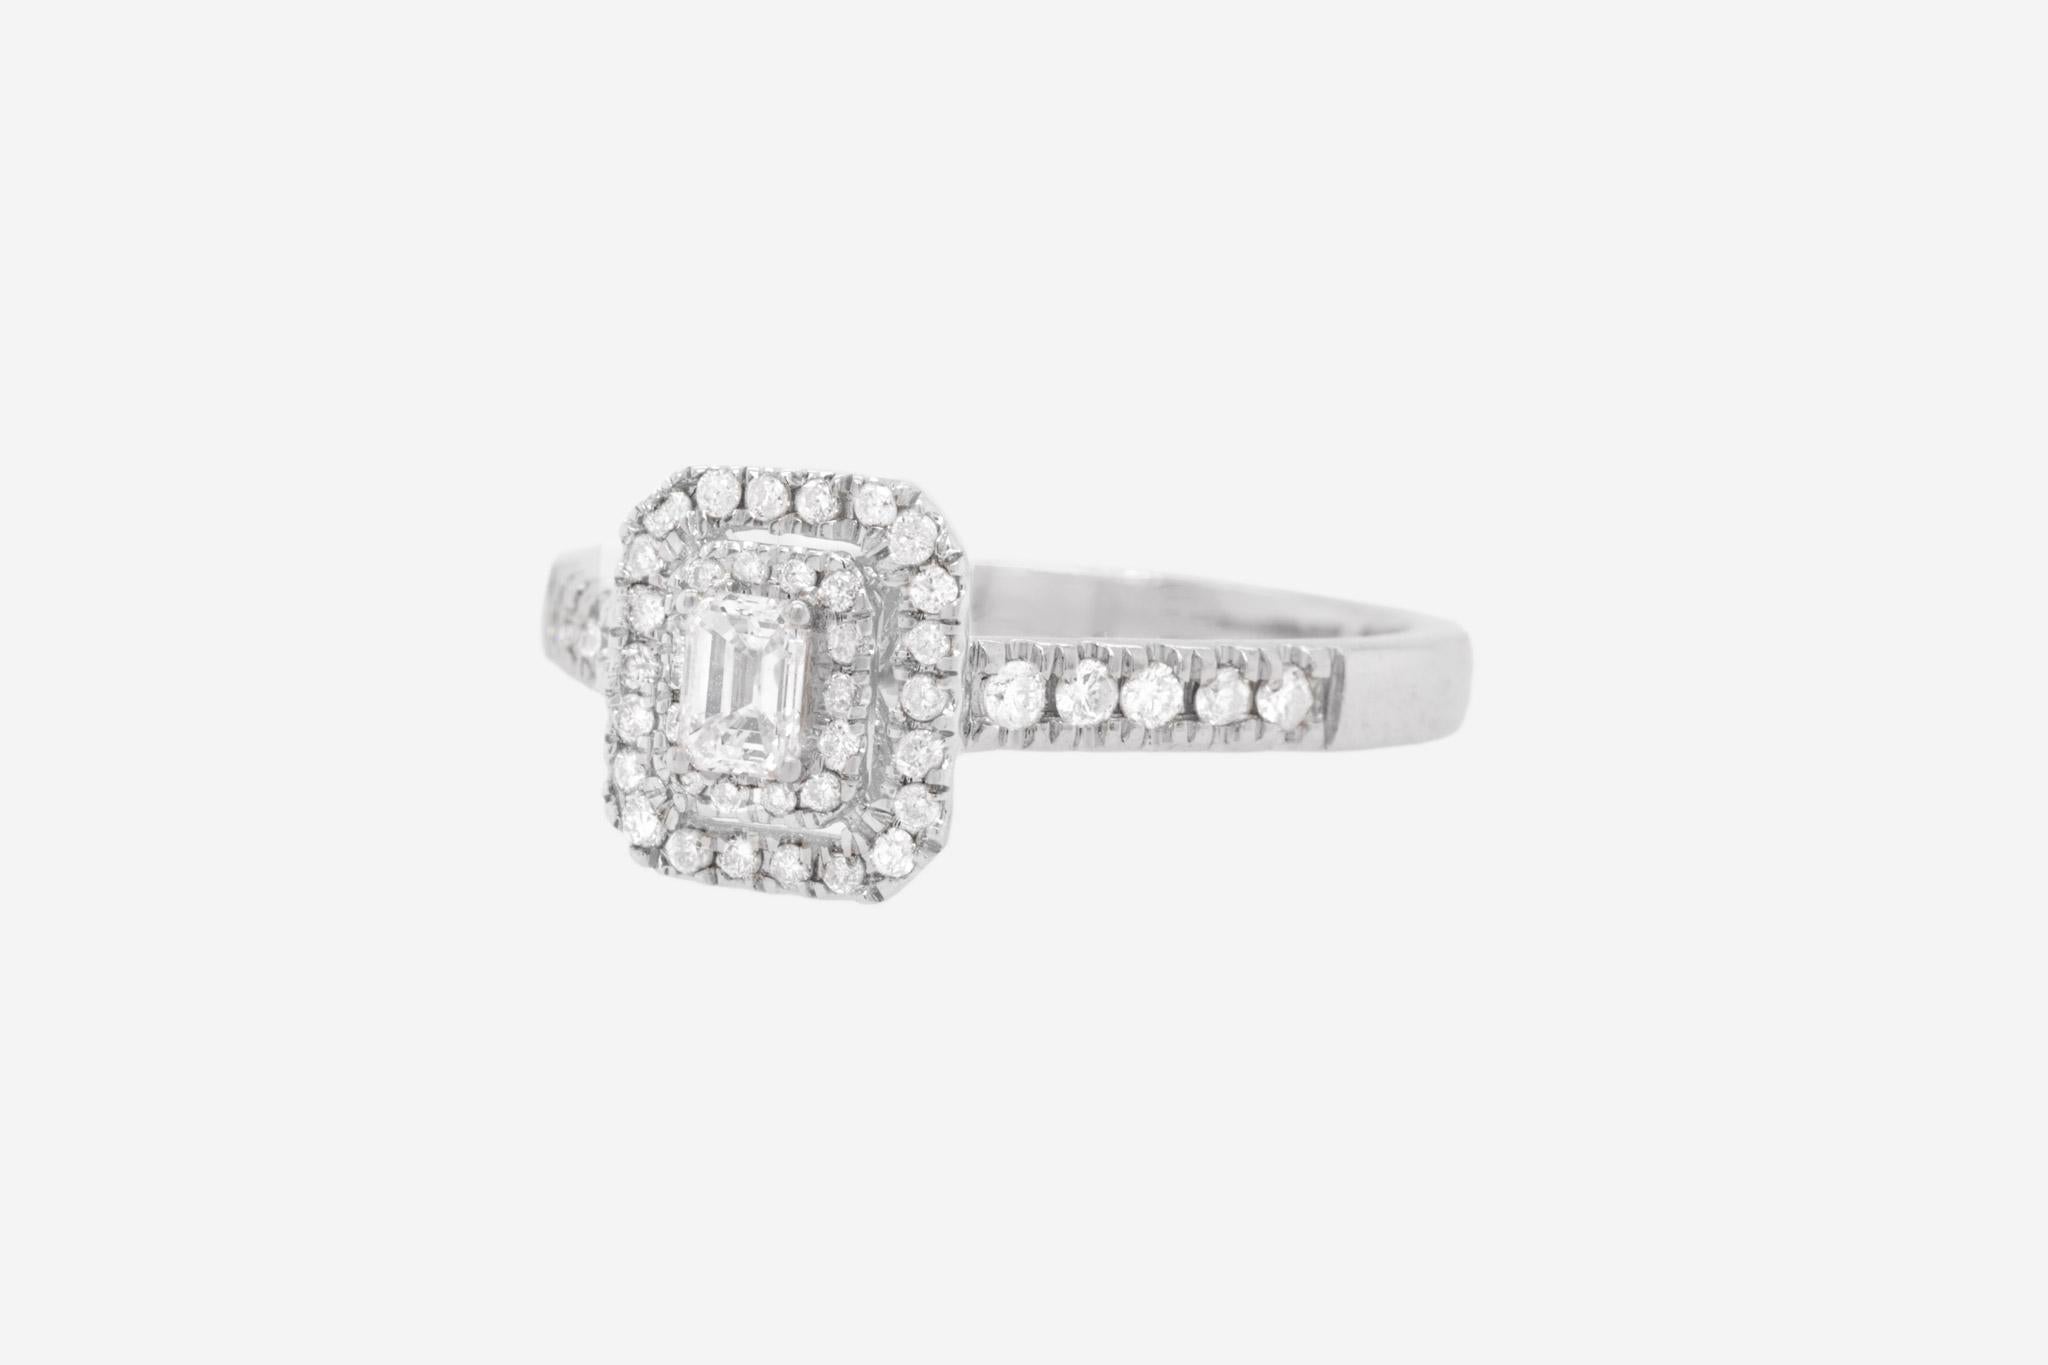 Emerald Cut Diamond Ring 0.75 Carats Total 14K Gold For Sale